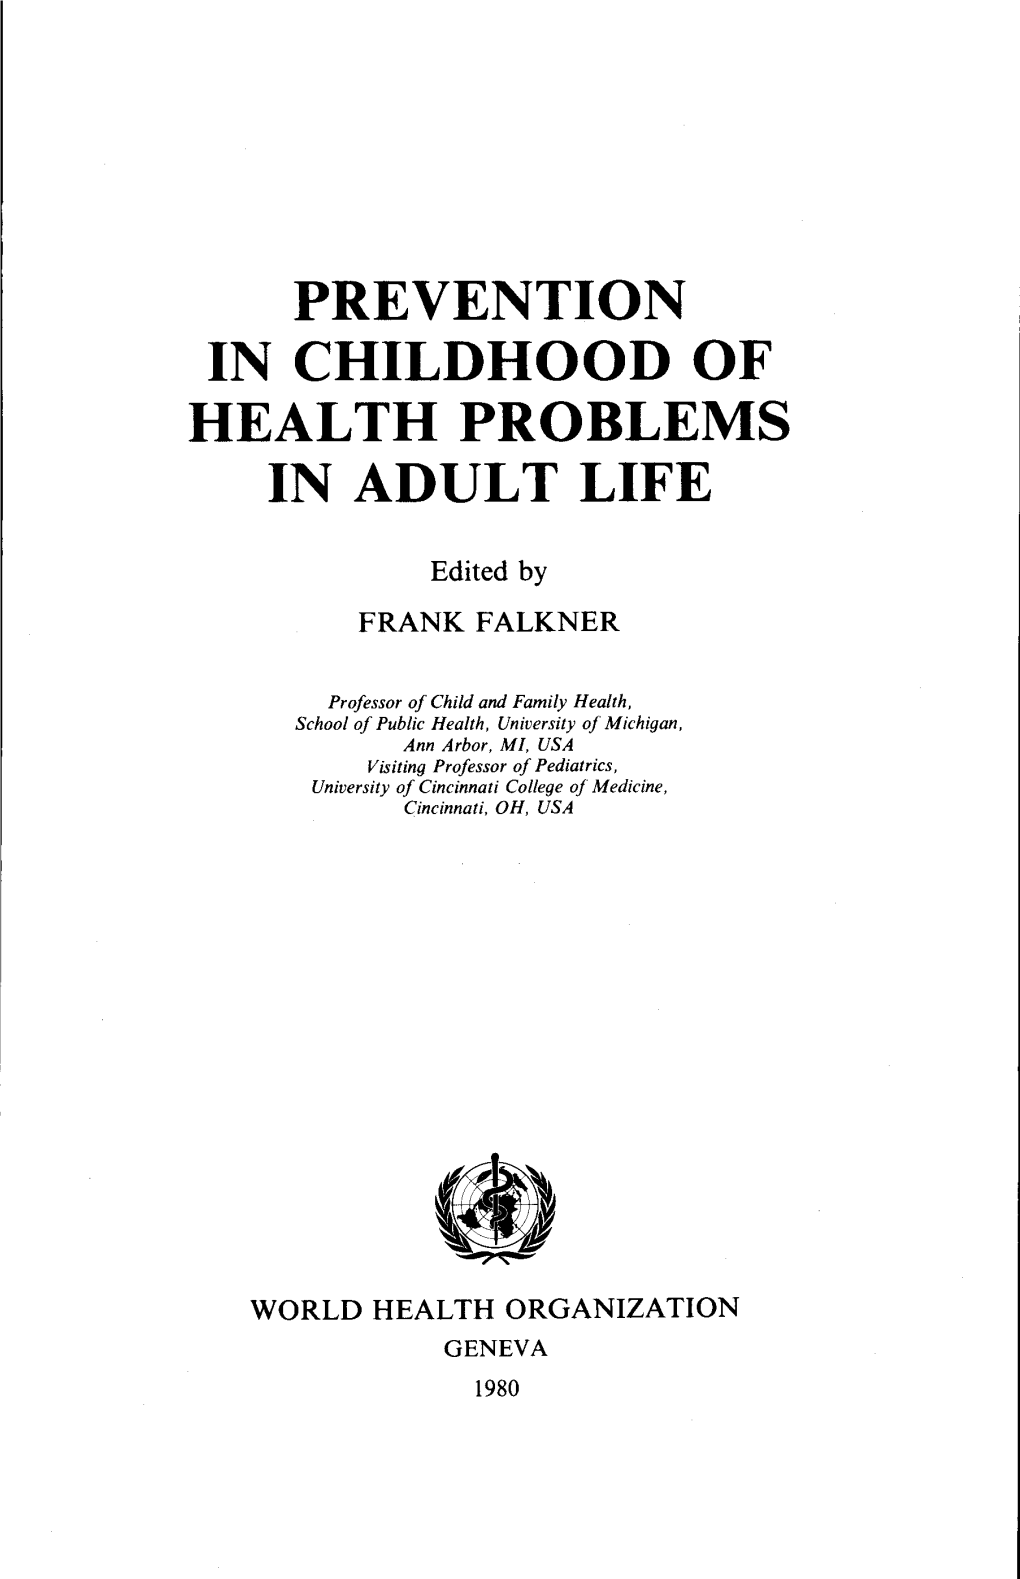 Prevention in Childhood of Health Problems in Adult Life